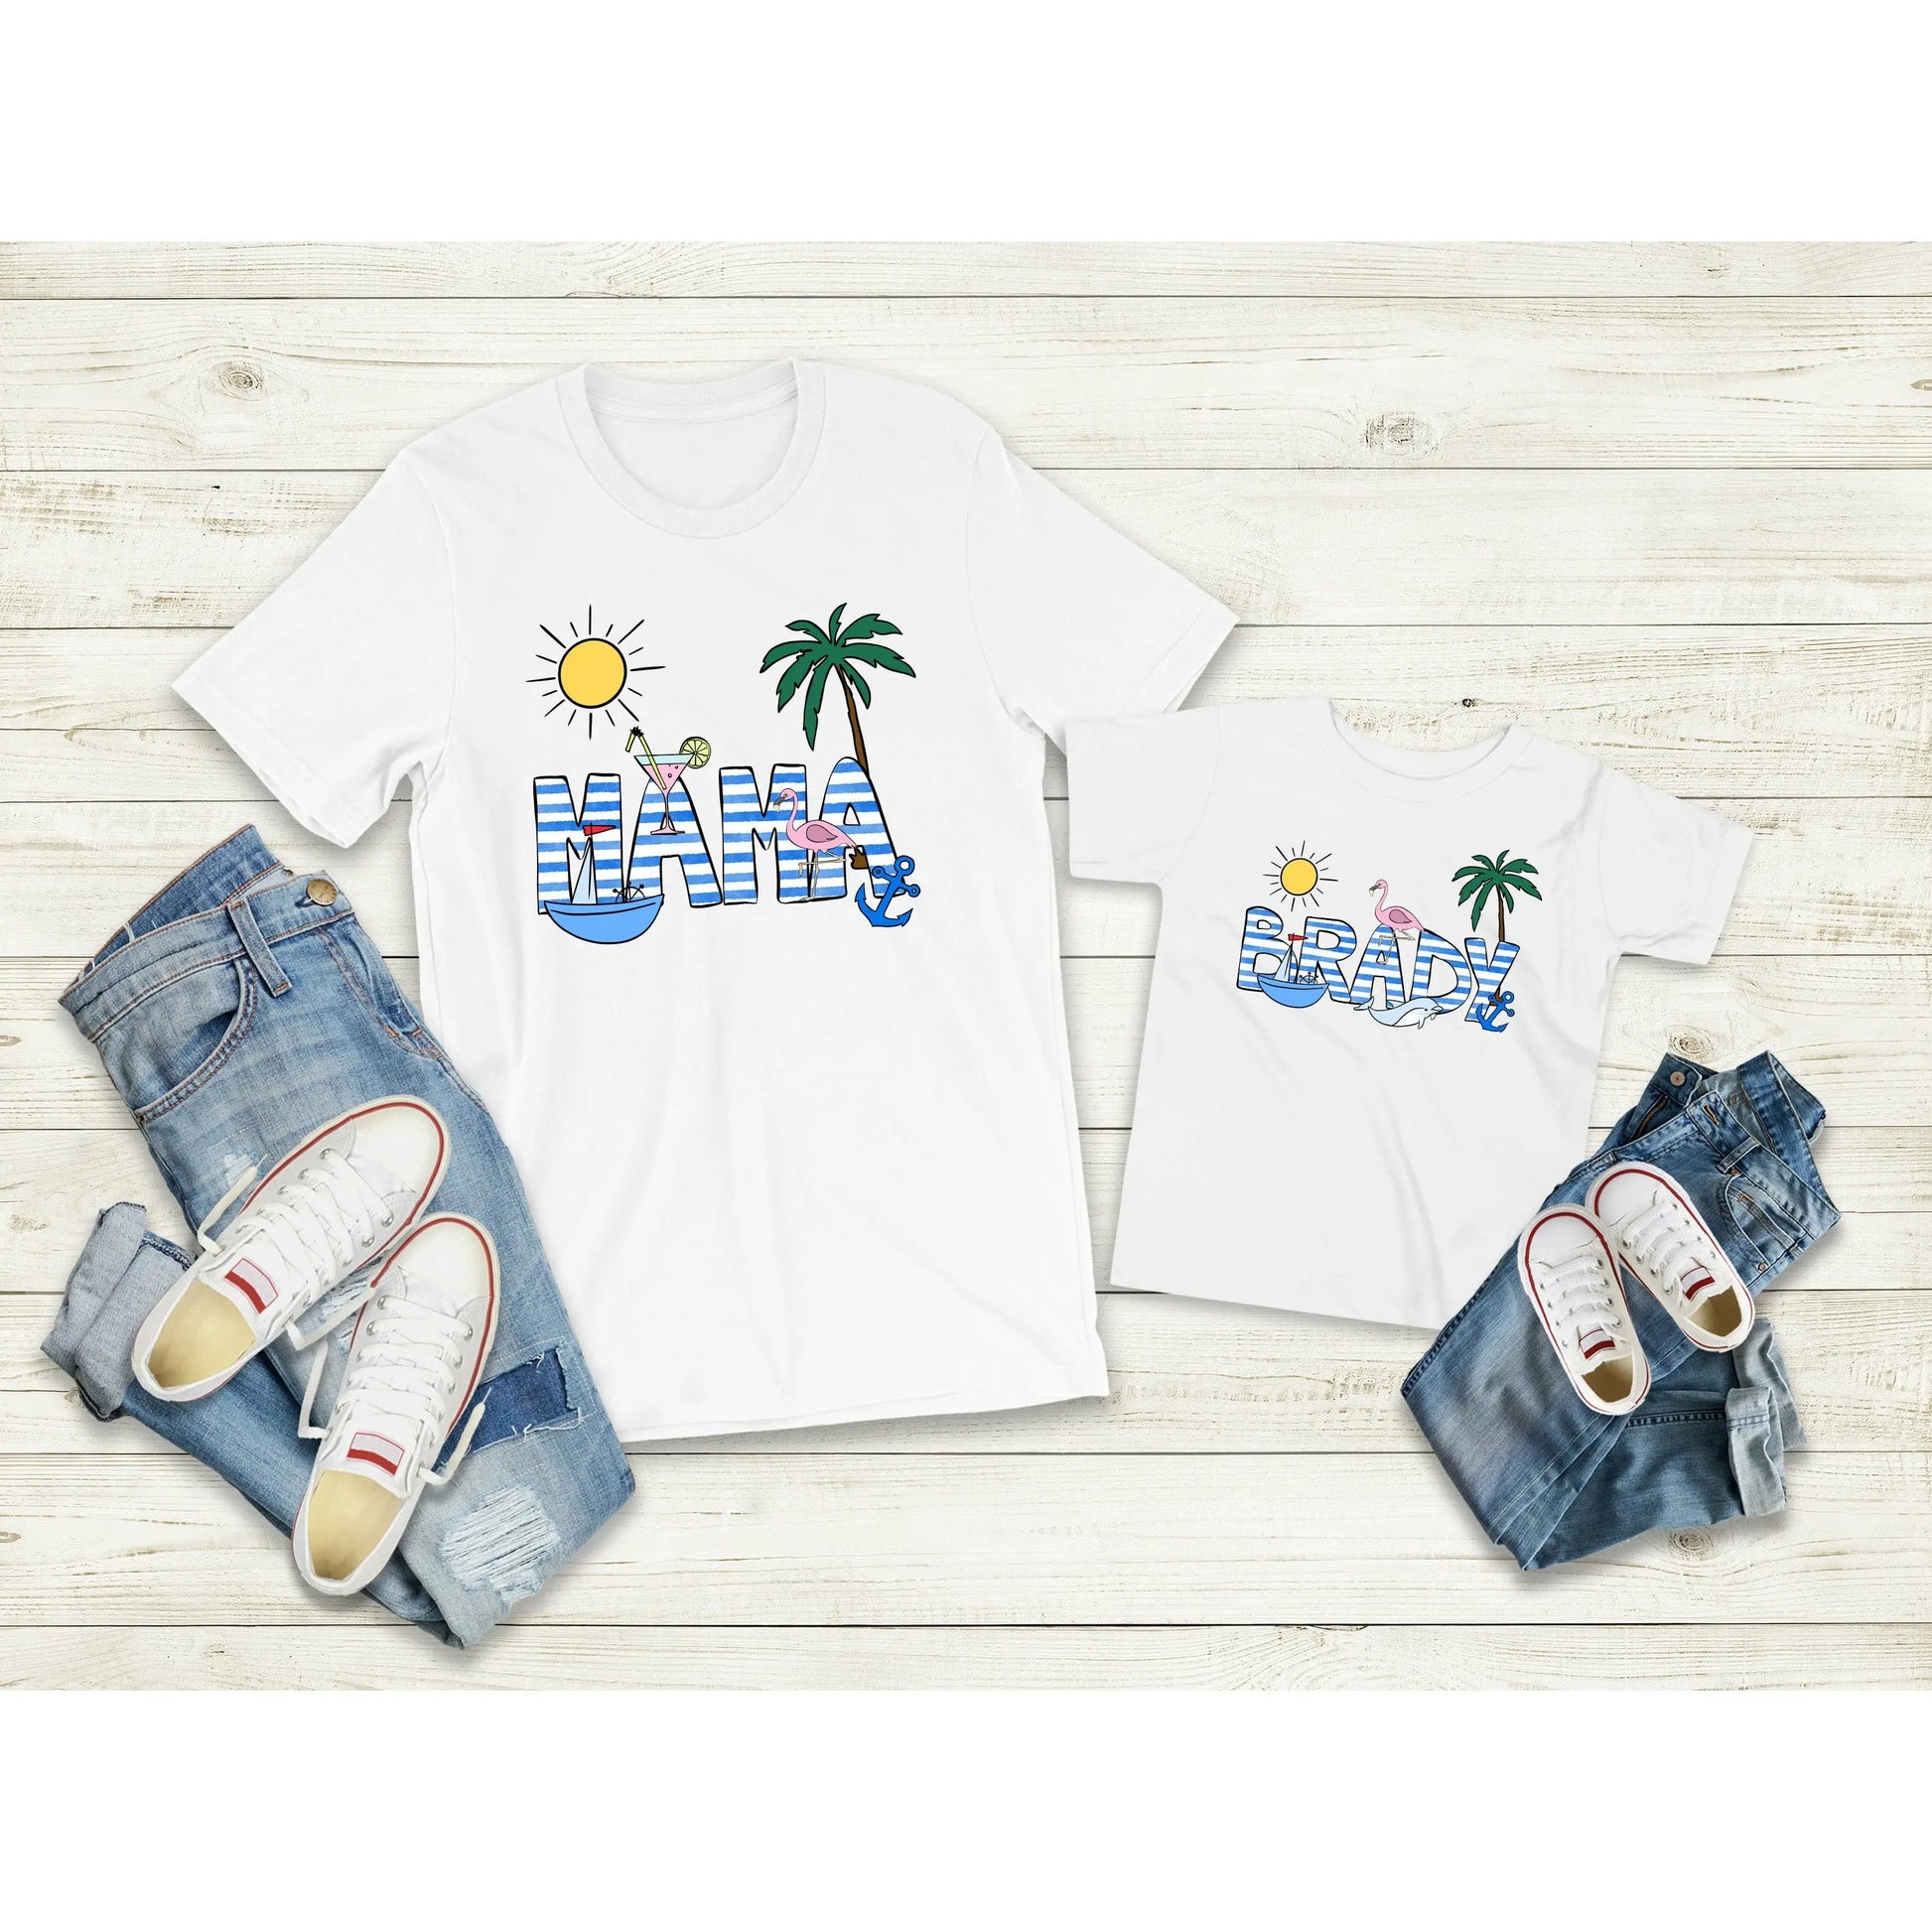 Beach Personalized Youth Child's T-shirt S M L XL | Summer Vacation, Family Vacation, Beach Matching Shirts Printify